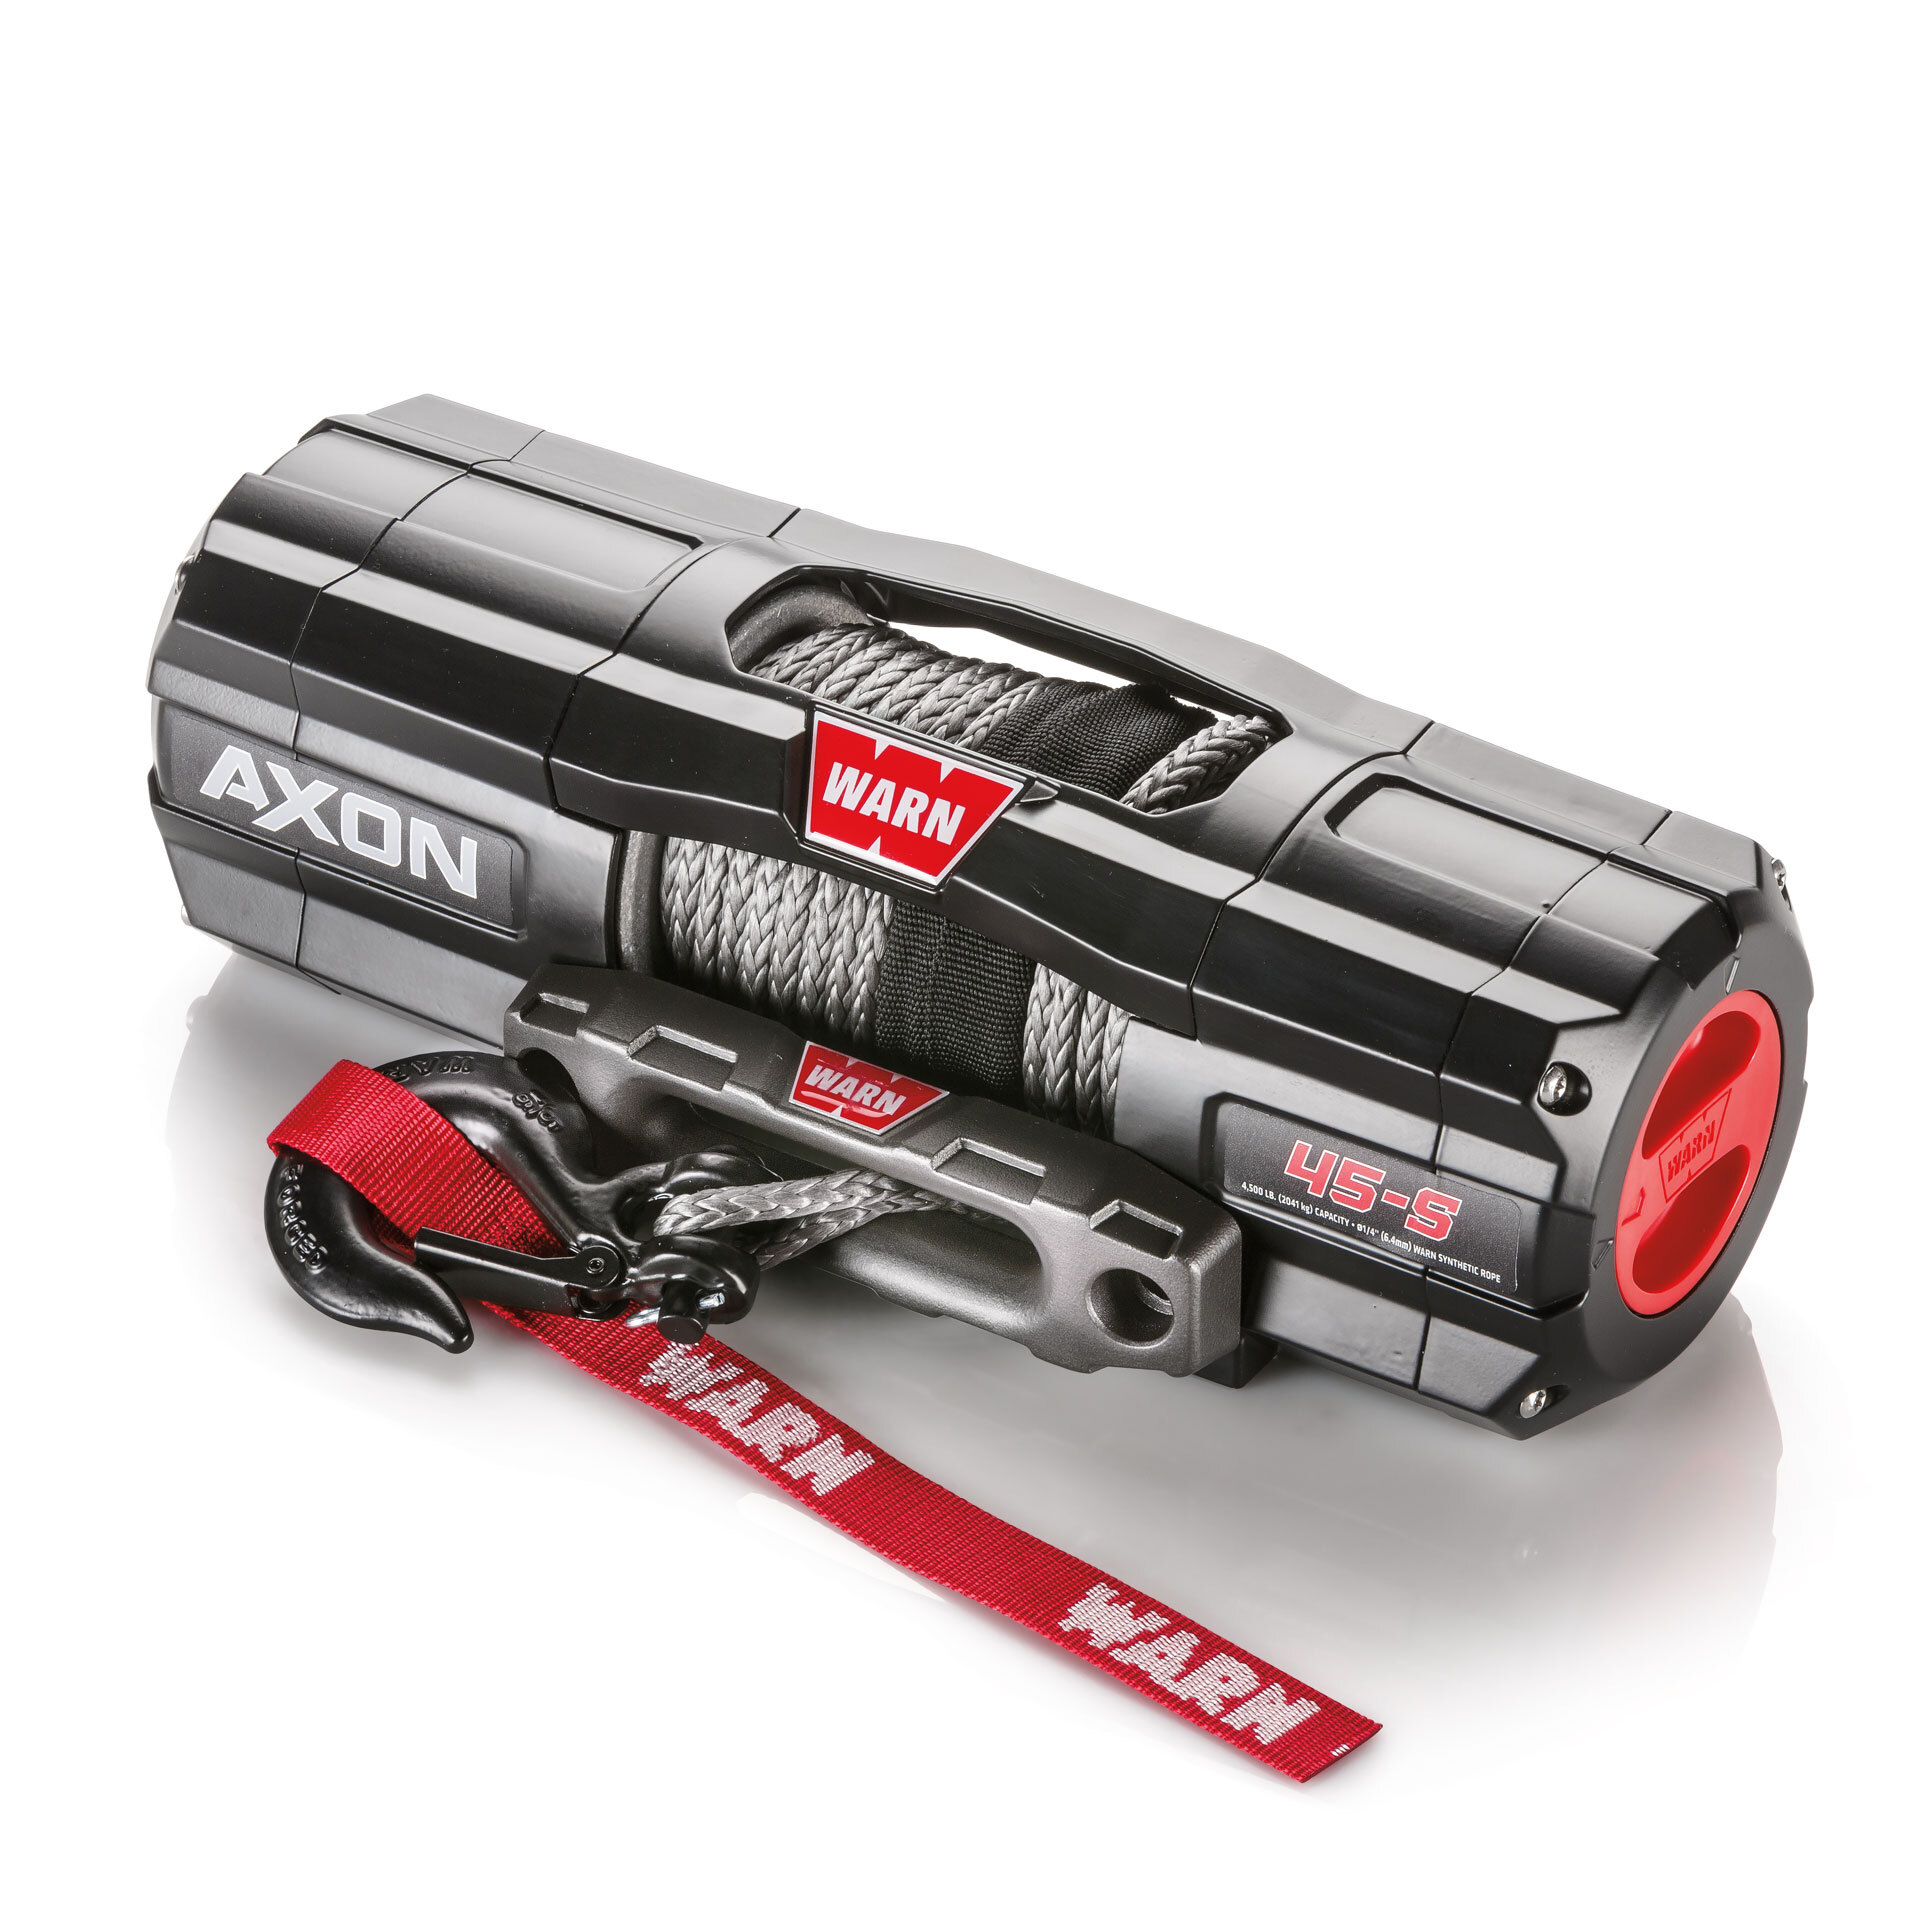 WARN® AXON 4500 Winch with Synthetic Rope